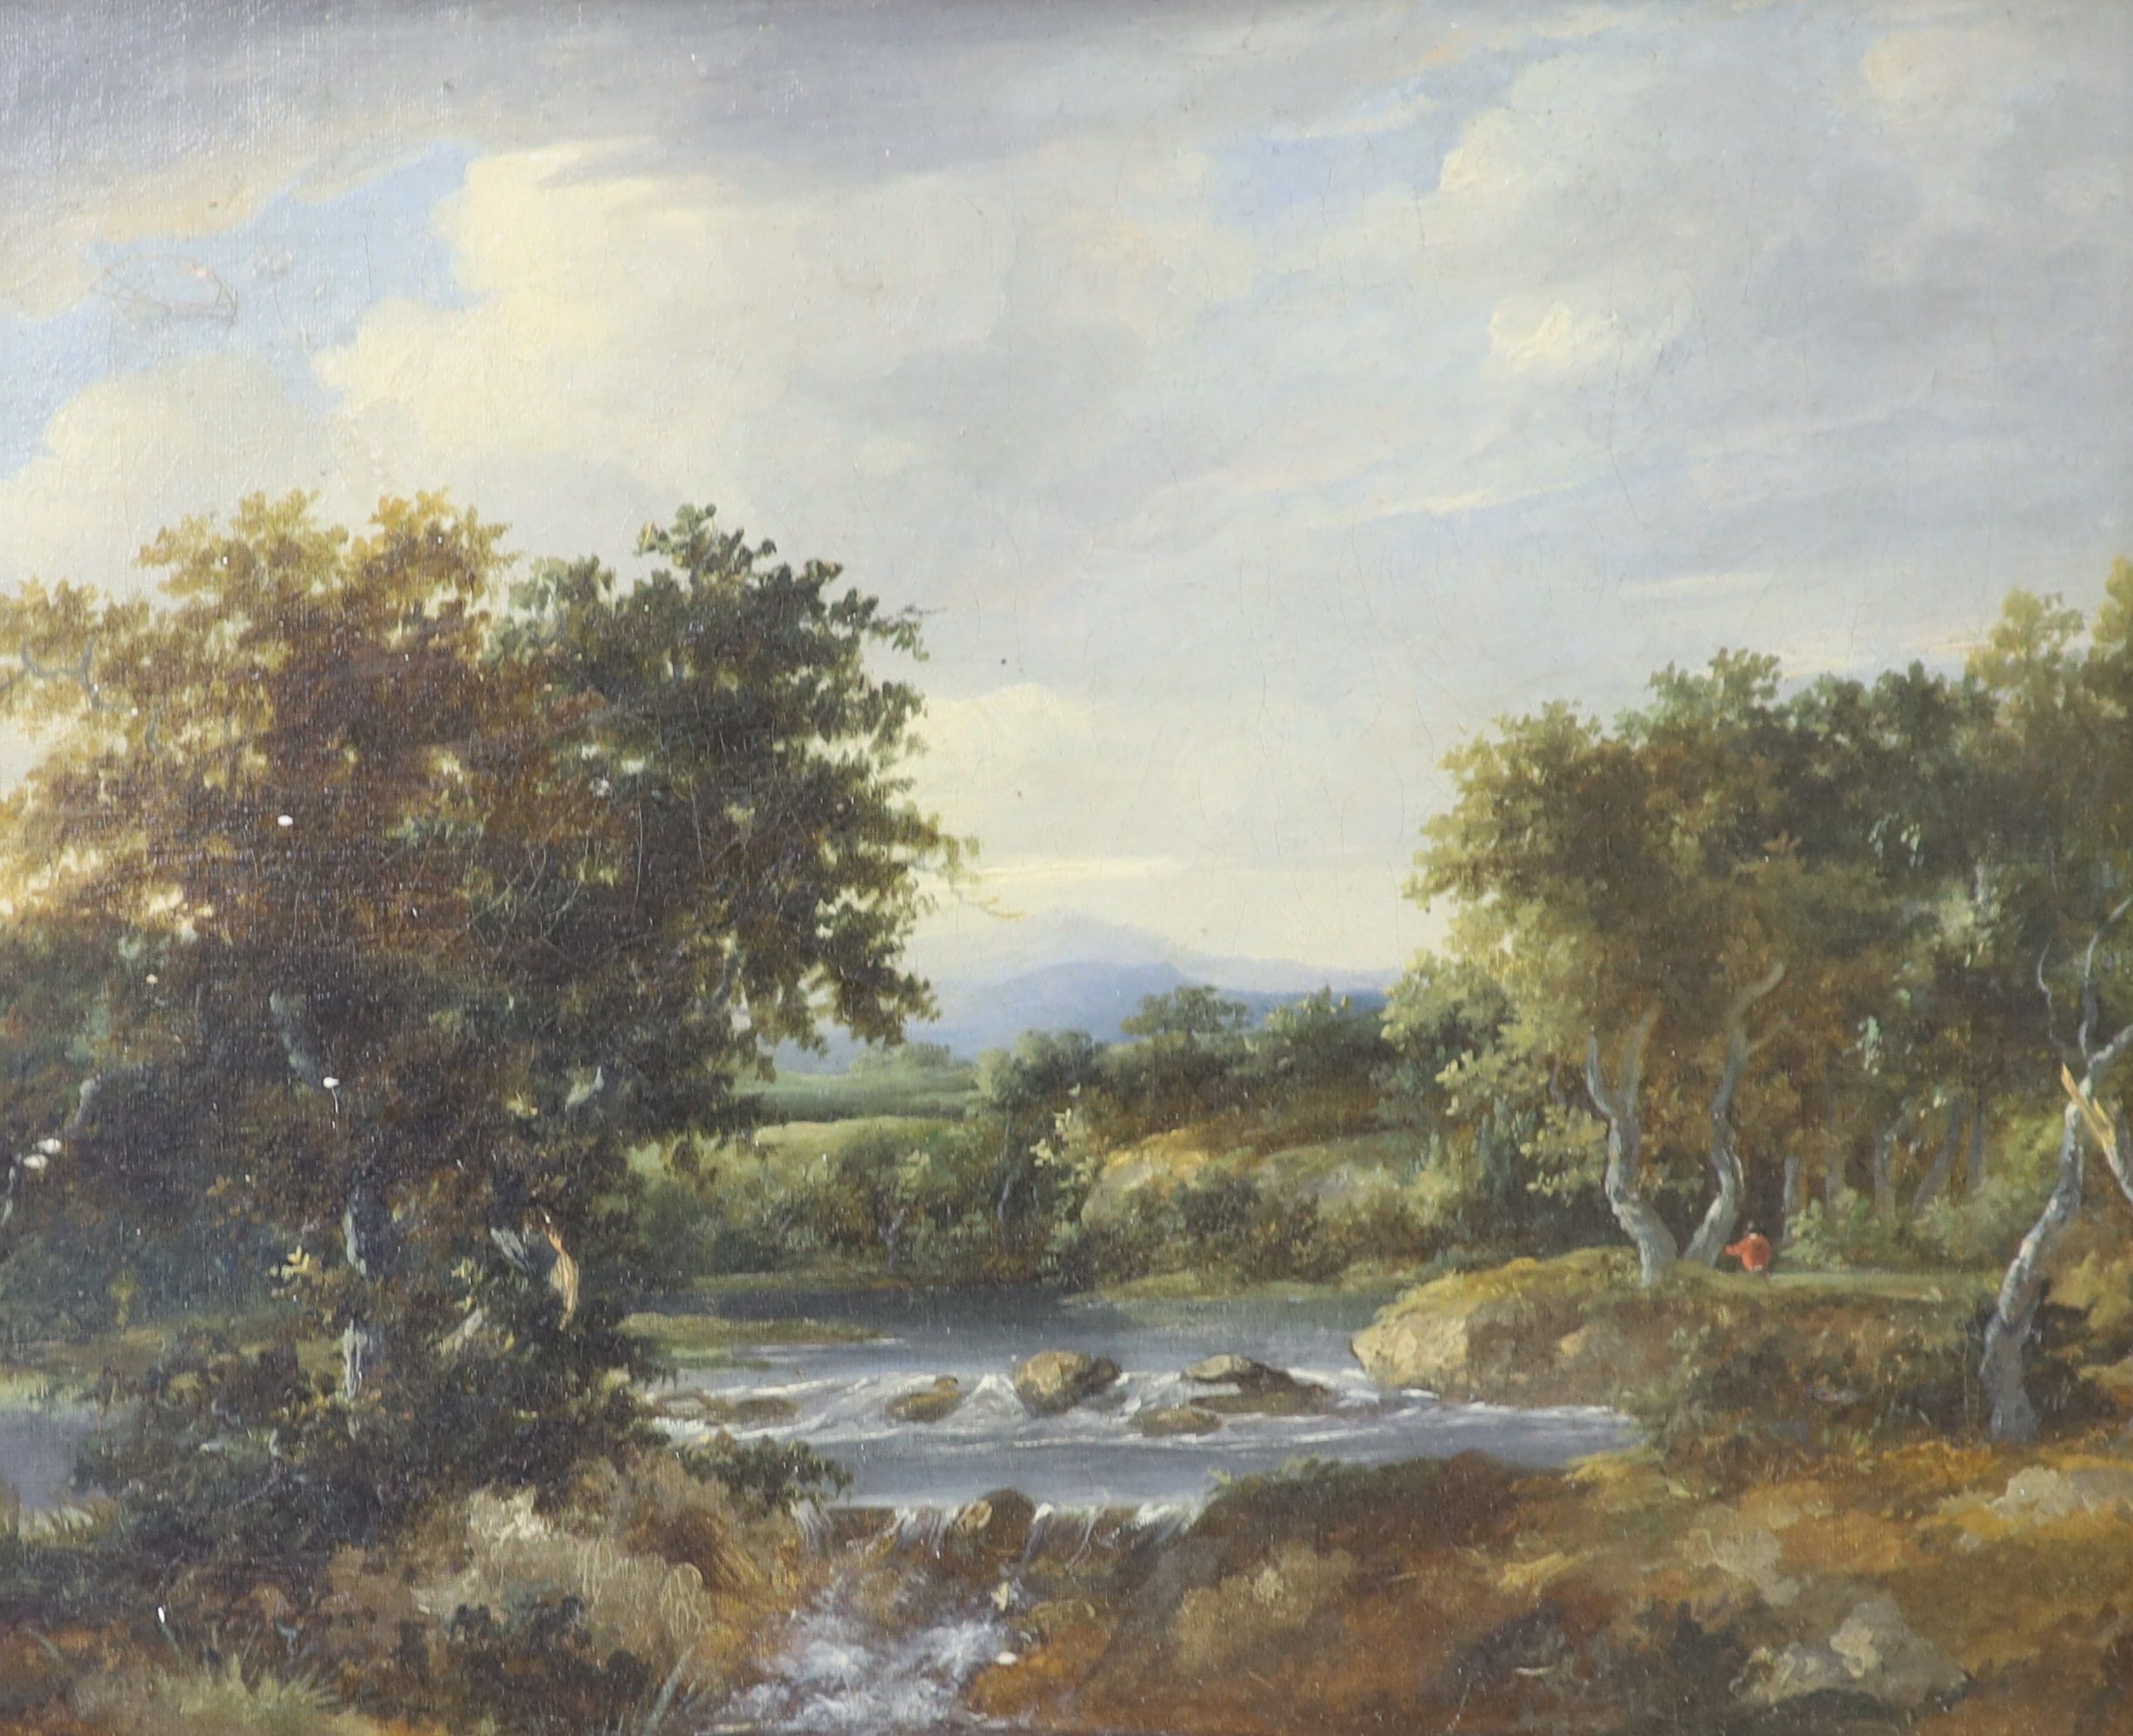 Edward Charles Williams (1807-1881), oil on canvas, Stepping stones across the river, 23 x 28.5cm